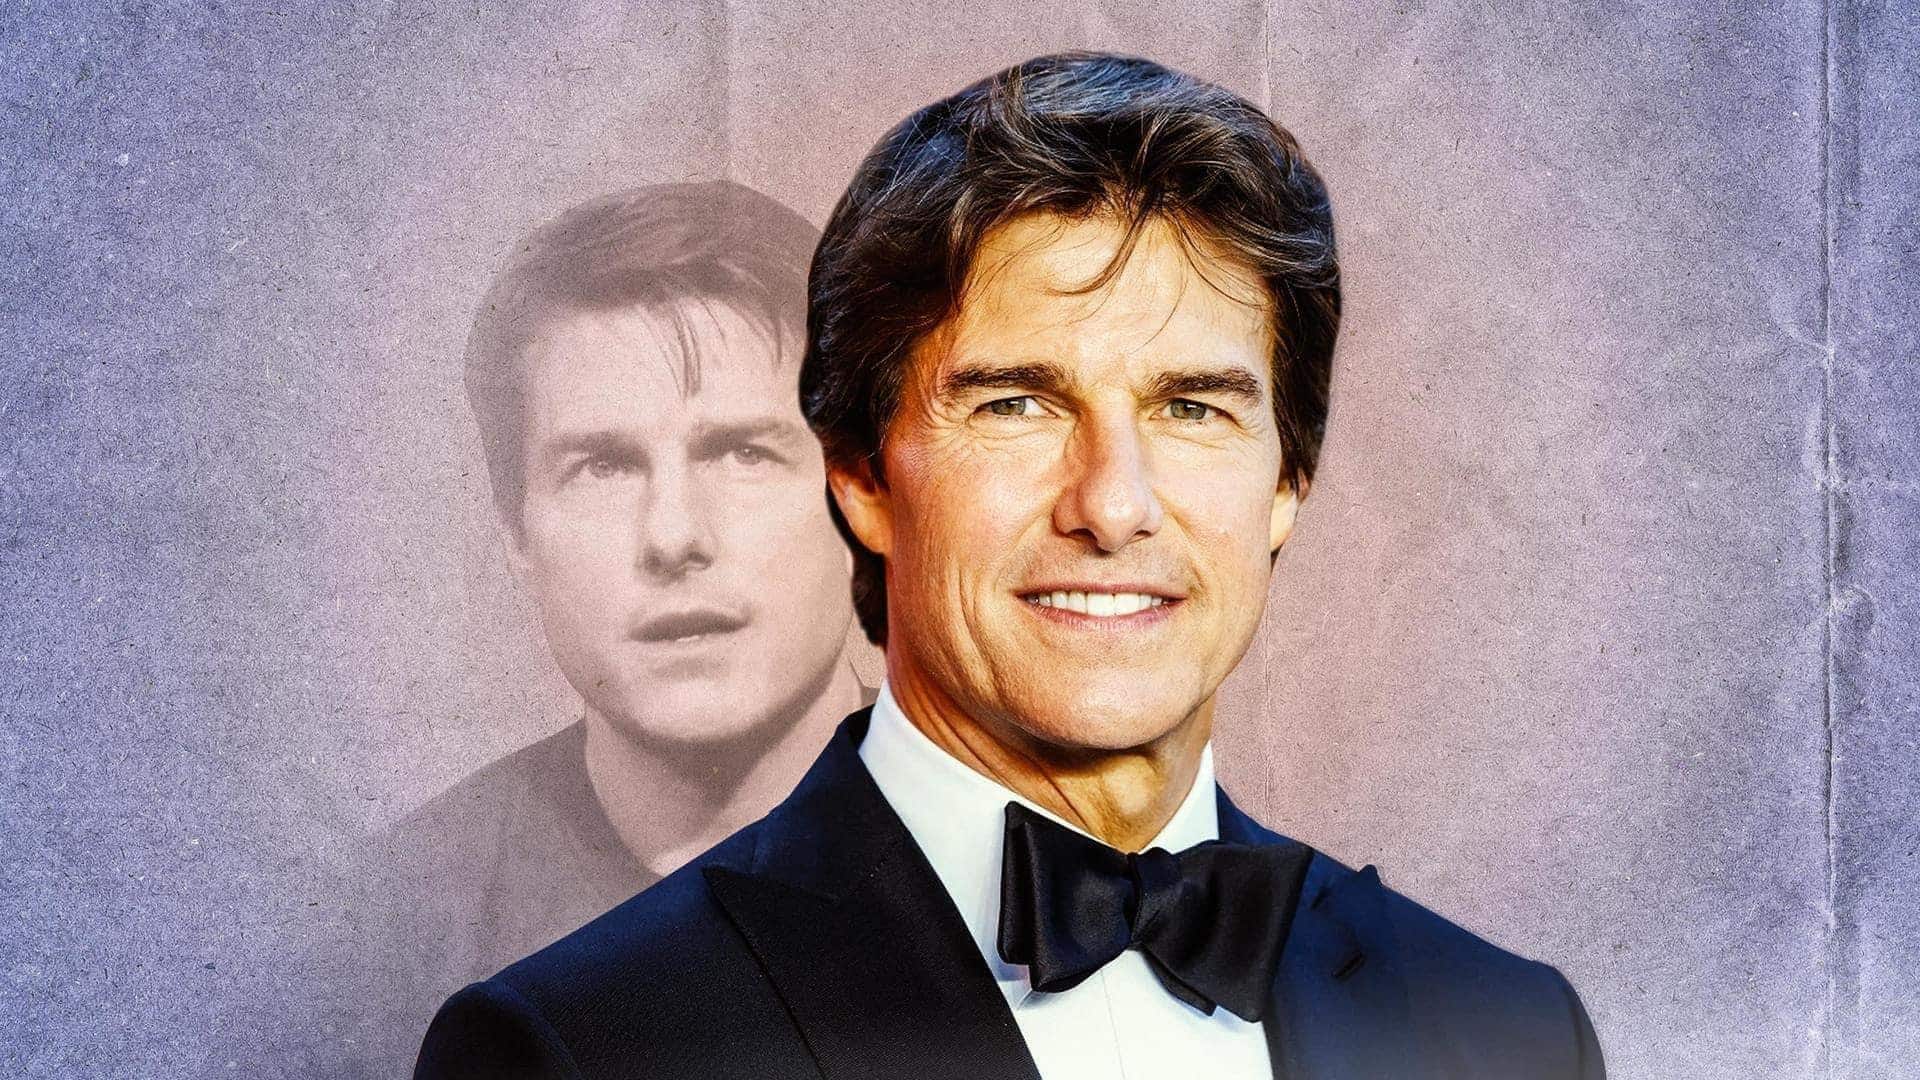 'Top Gun 3': Tom Cruise starrer is in pre-production stage